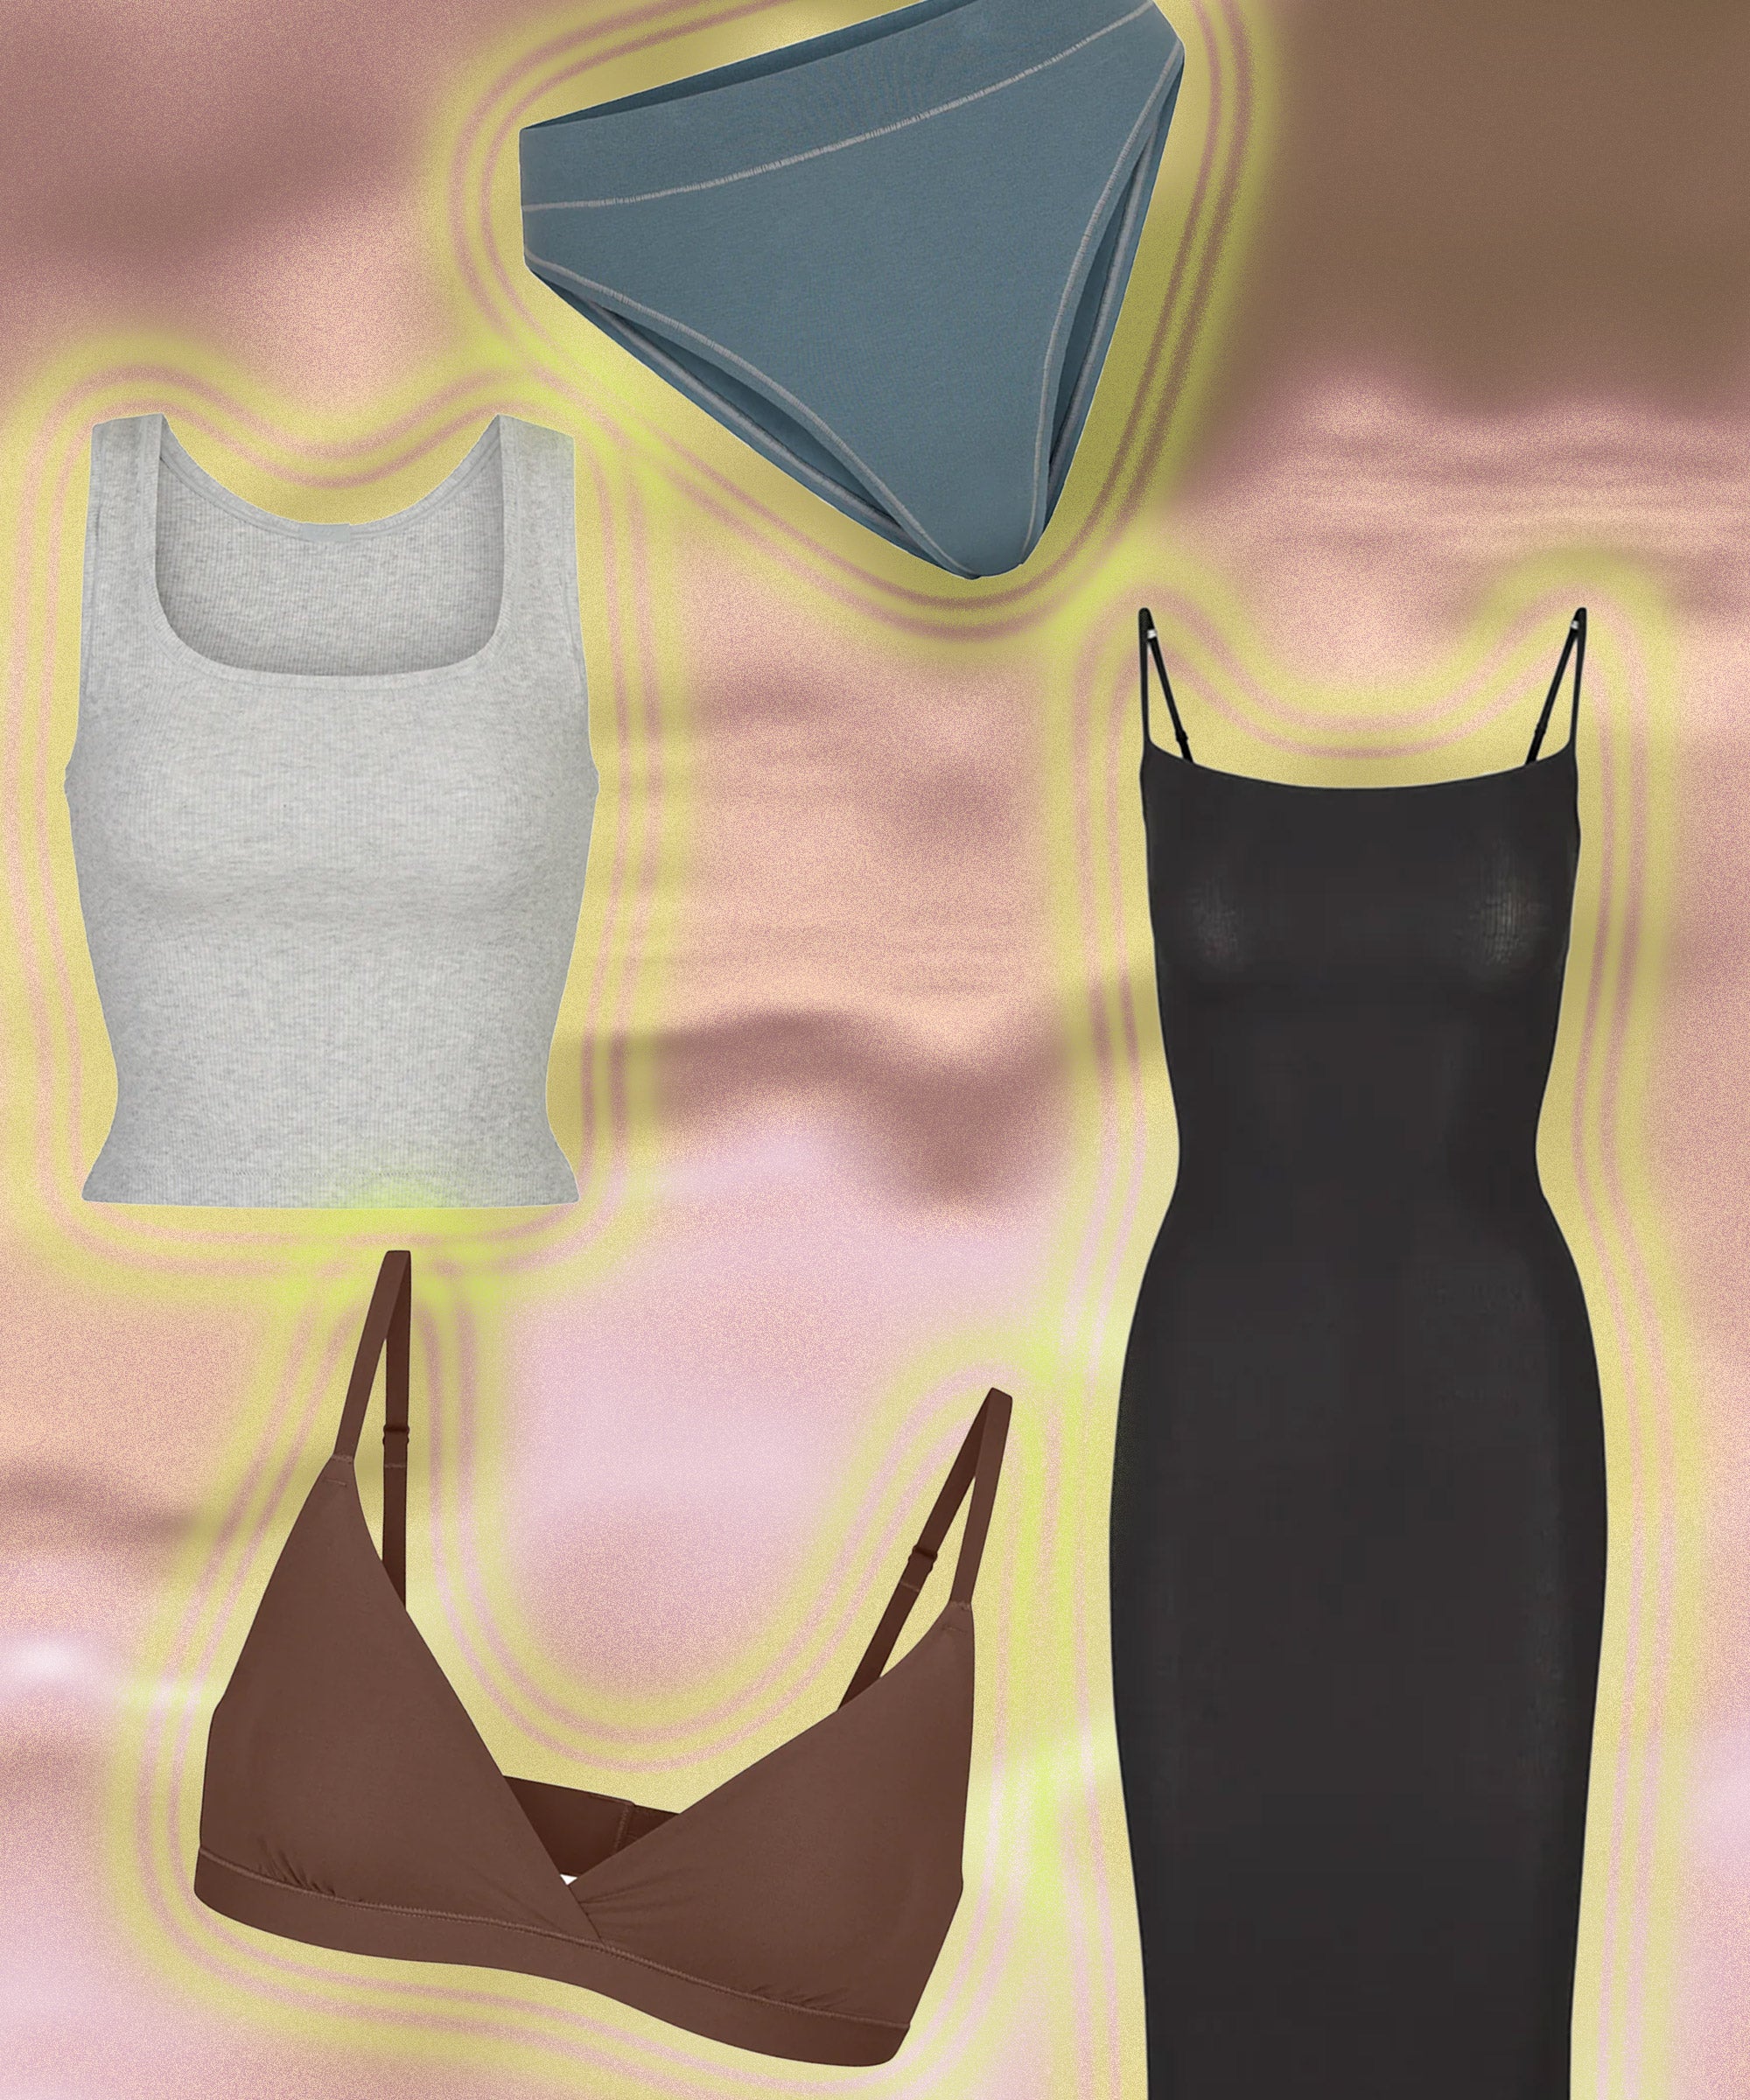 The Modern Venus: Dress, Underwear and Accessories in the late